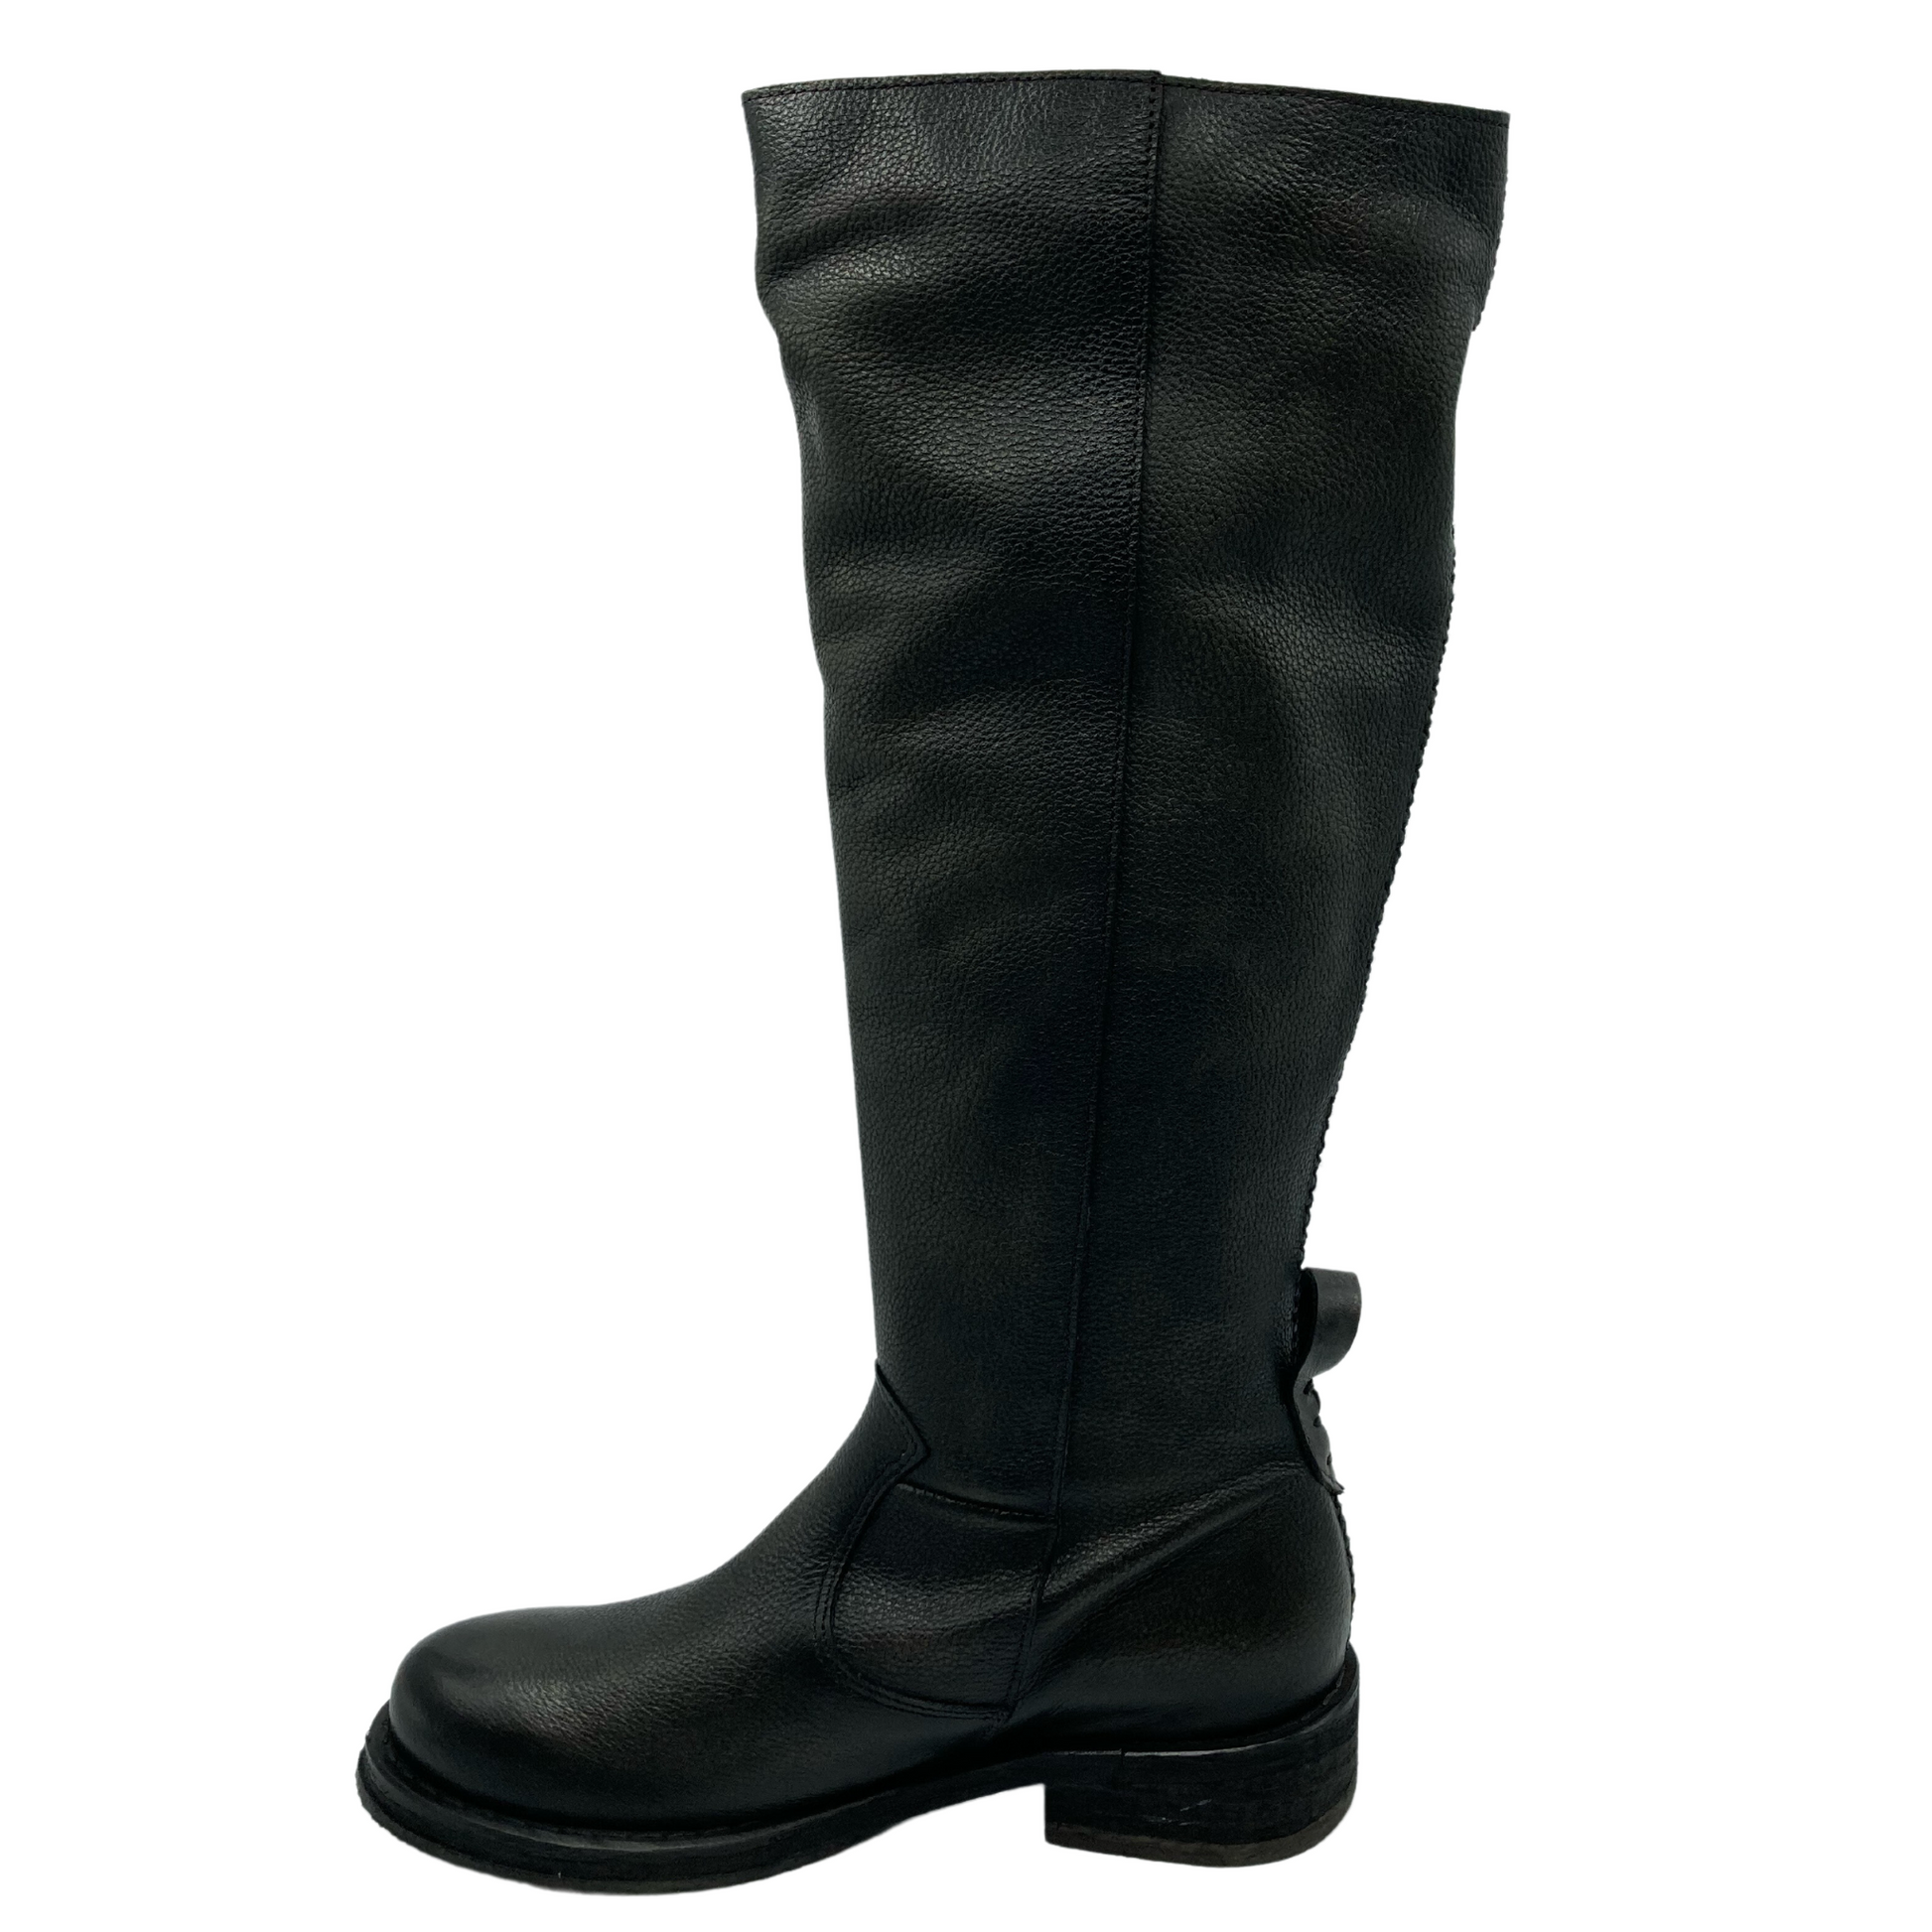 Left facing view of knee-height leather boot with rounded toe and 1.25 inch heel